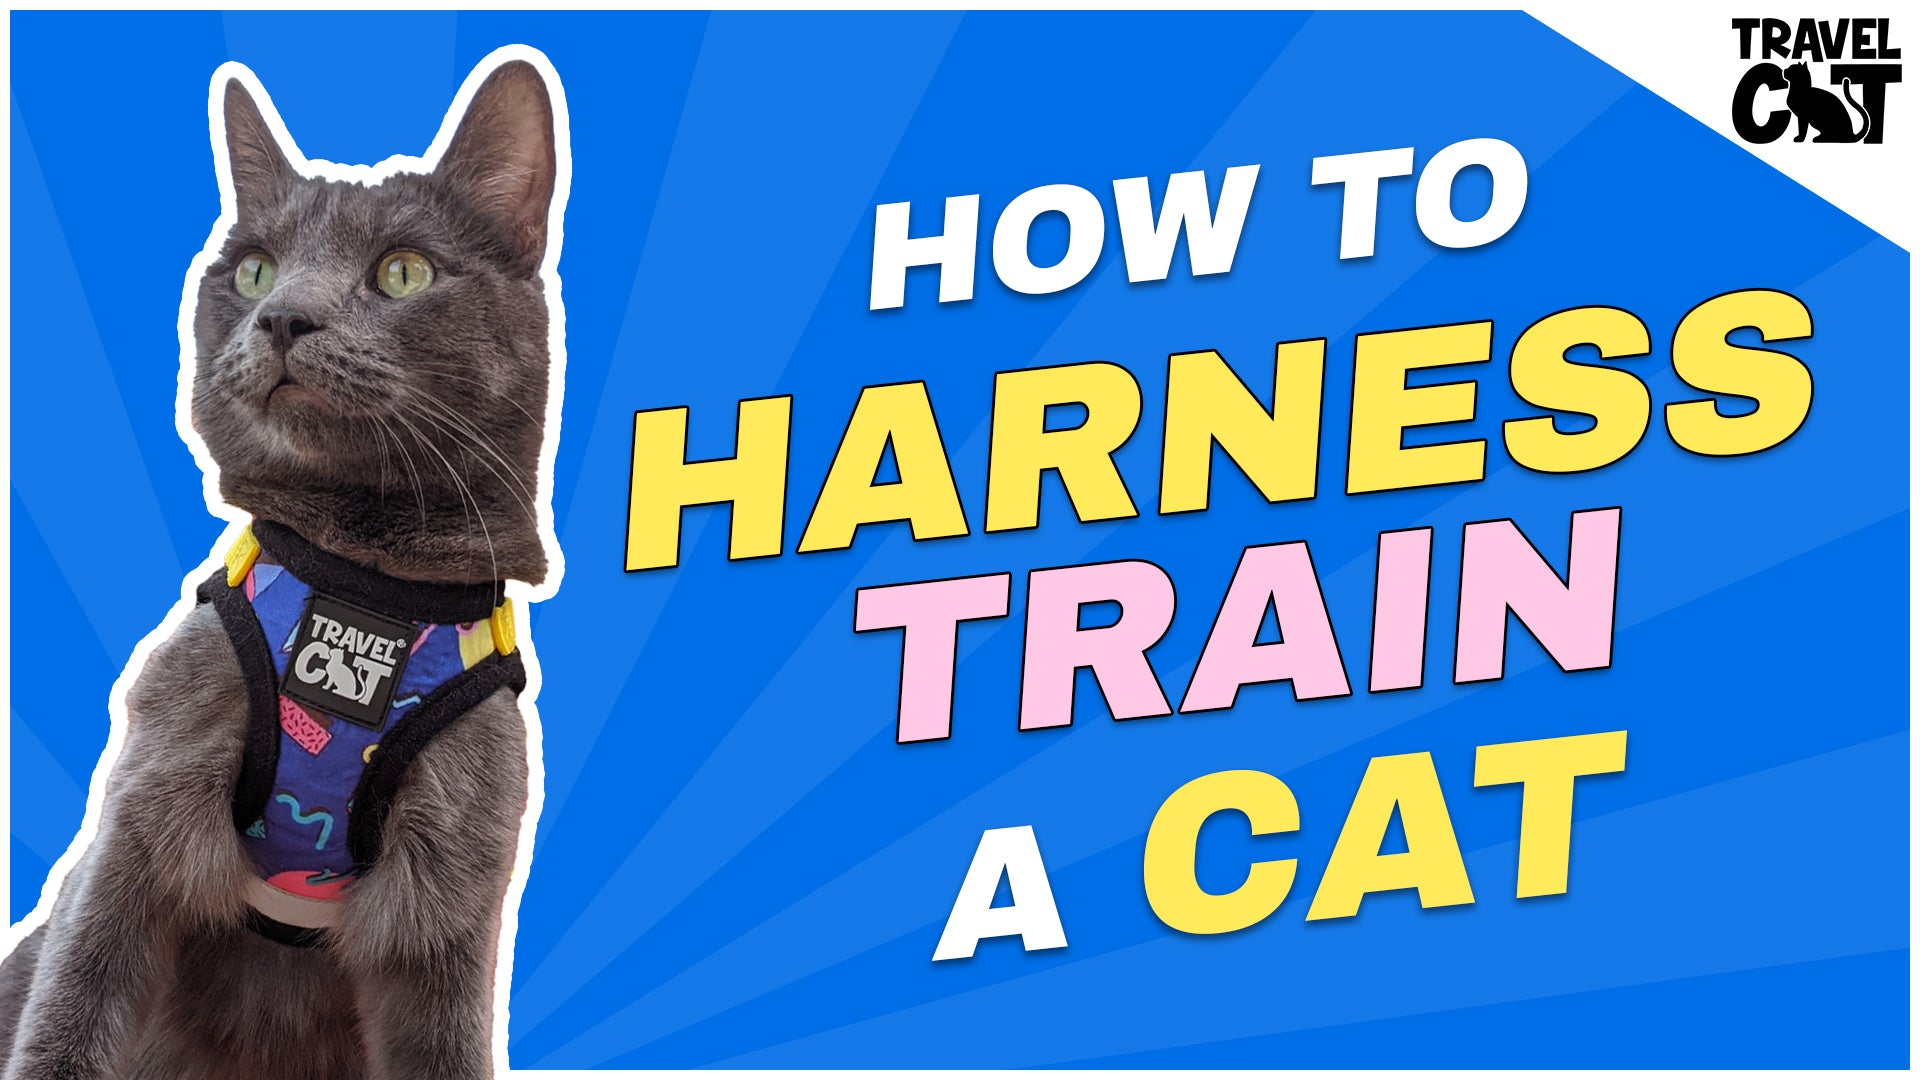 4 Real Travel Cat Parents Share Practical Cat Harness and Leash Training Tips for Getting Started